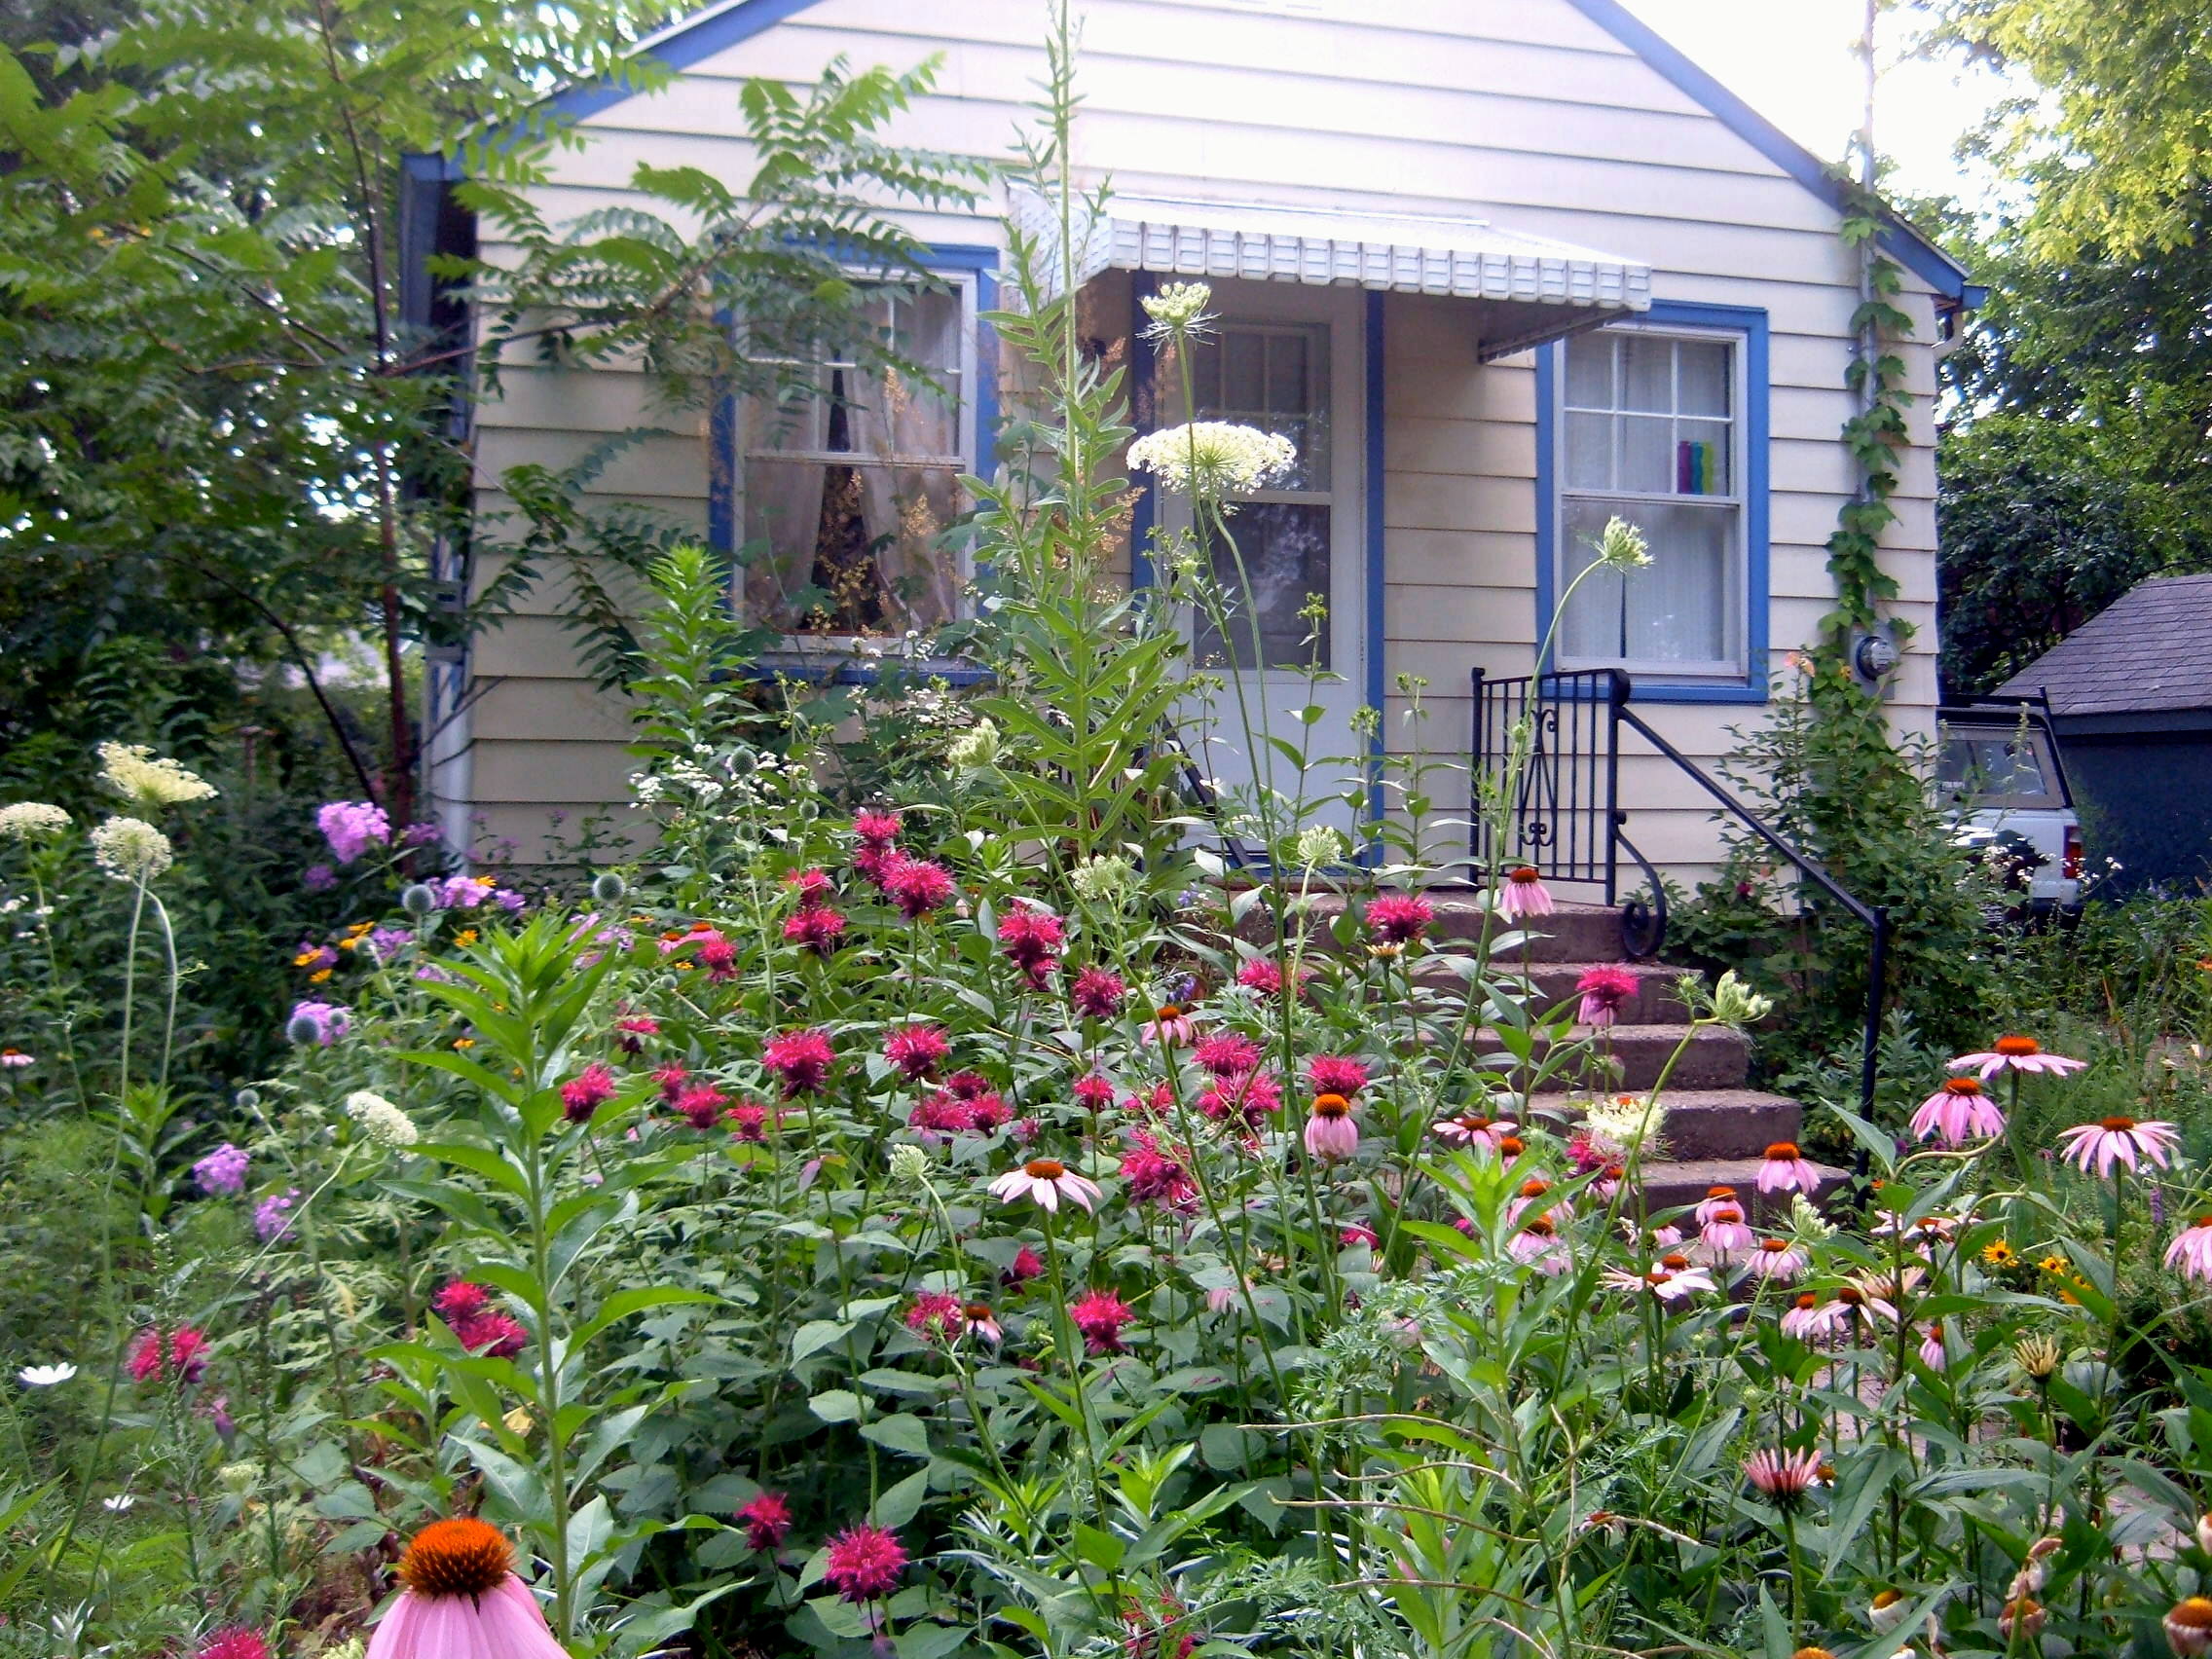 A small house with light paint and bright blue trim is dwarfed by the lush garden in the foreground, featuring flowers of a variety of shapes, sizes, and colors.